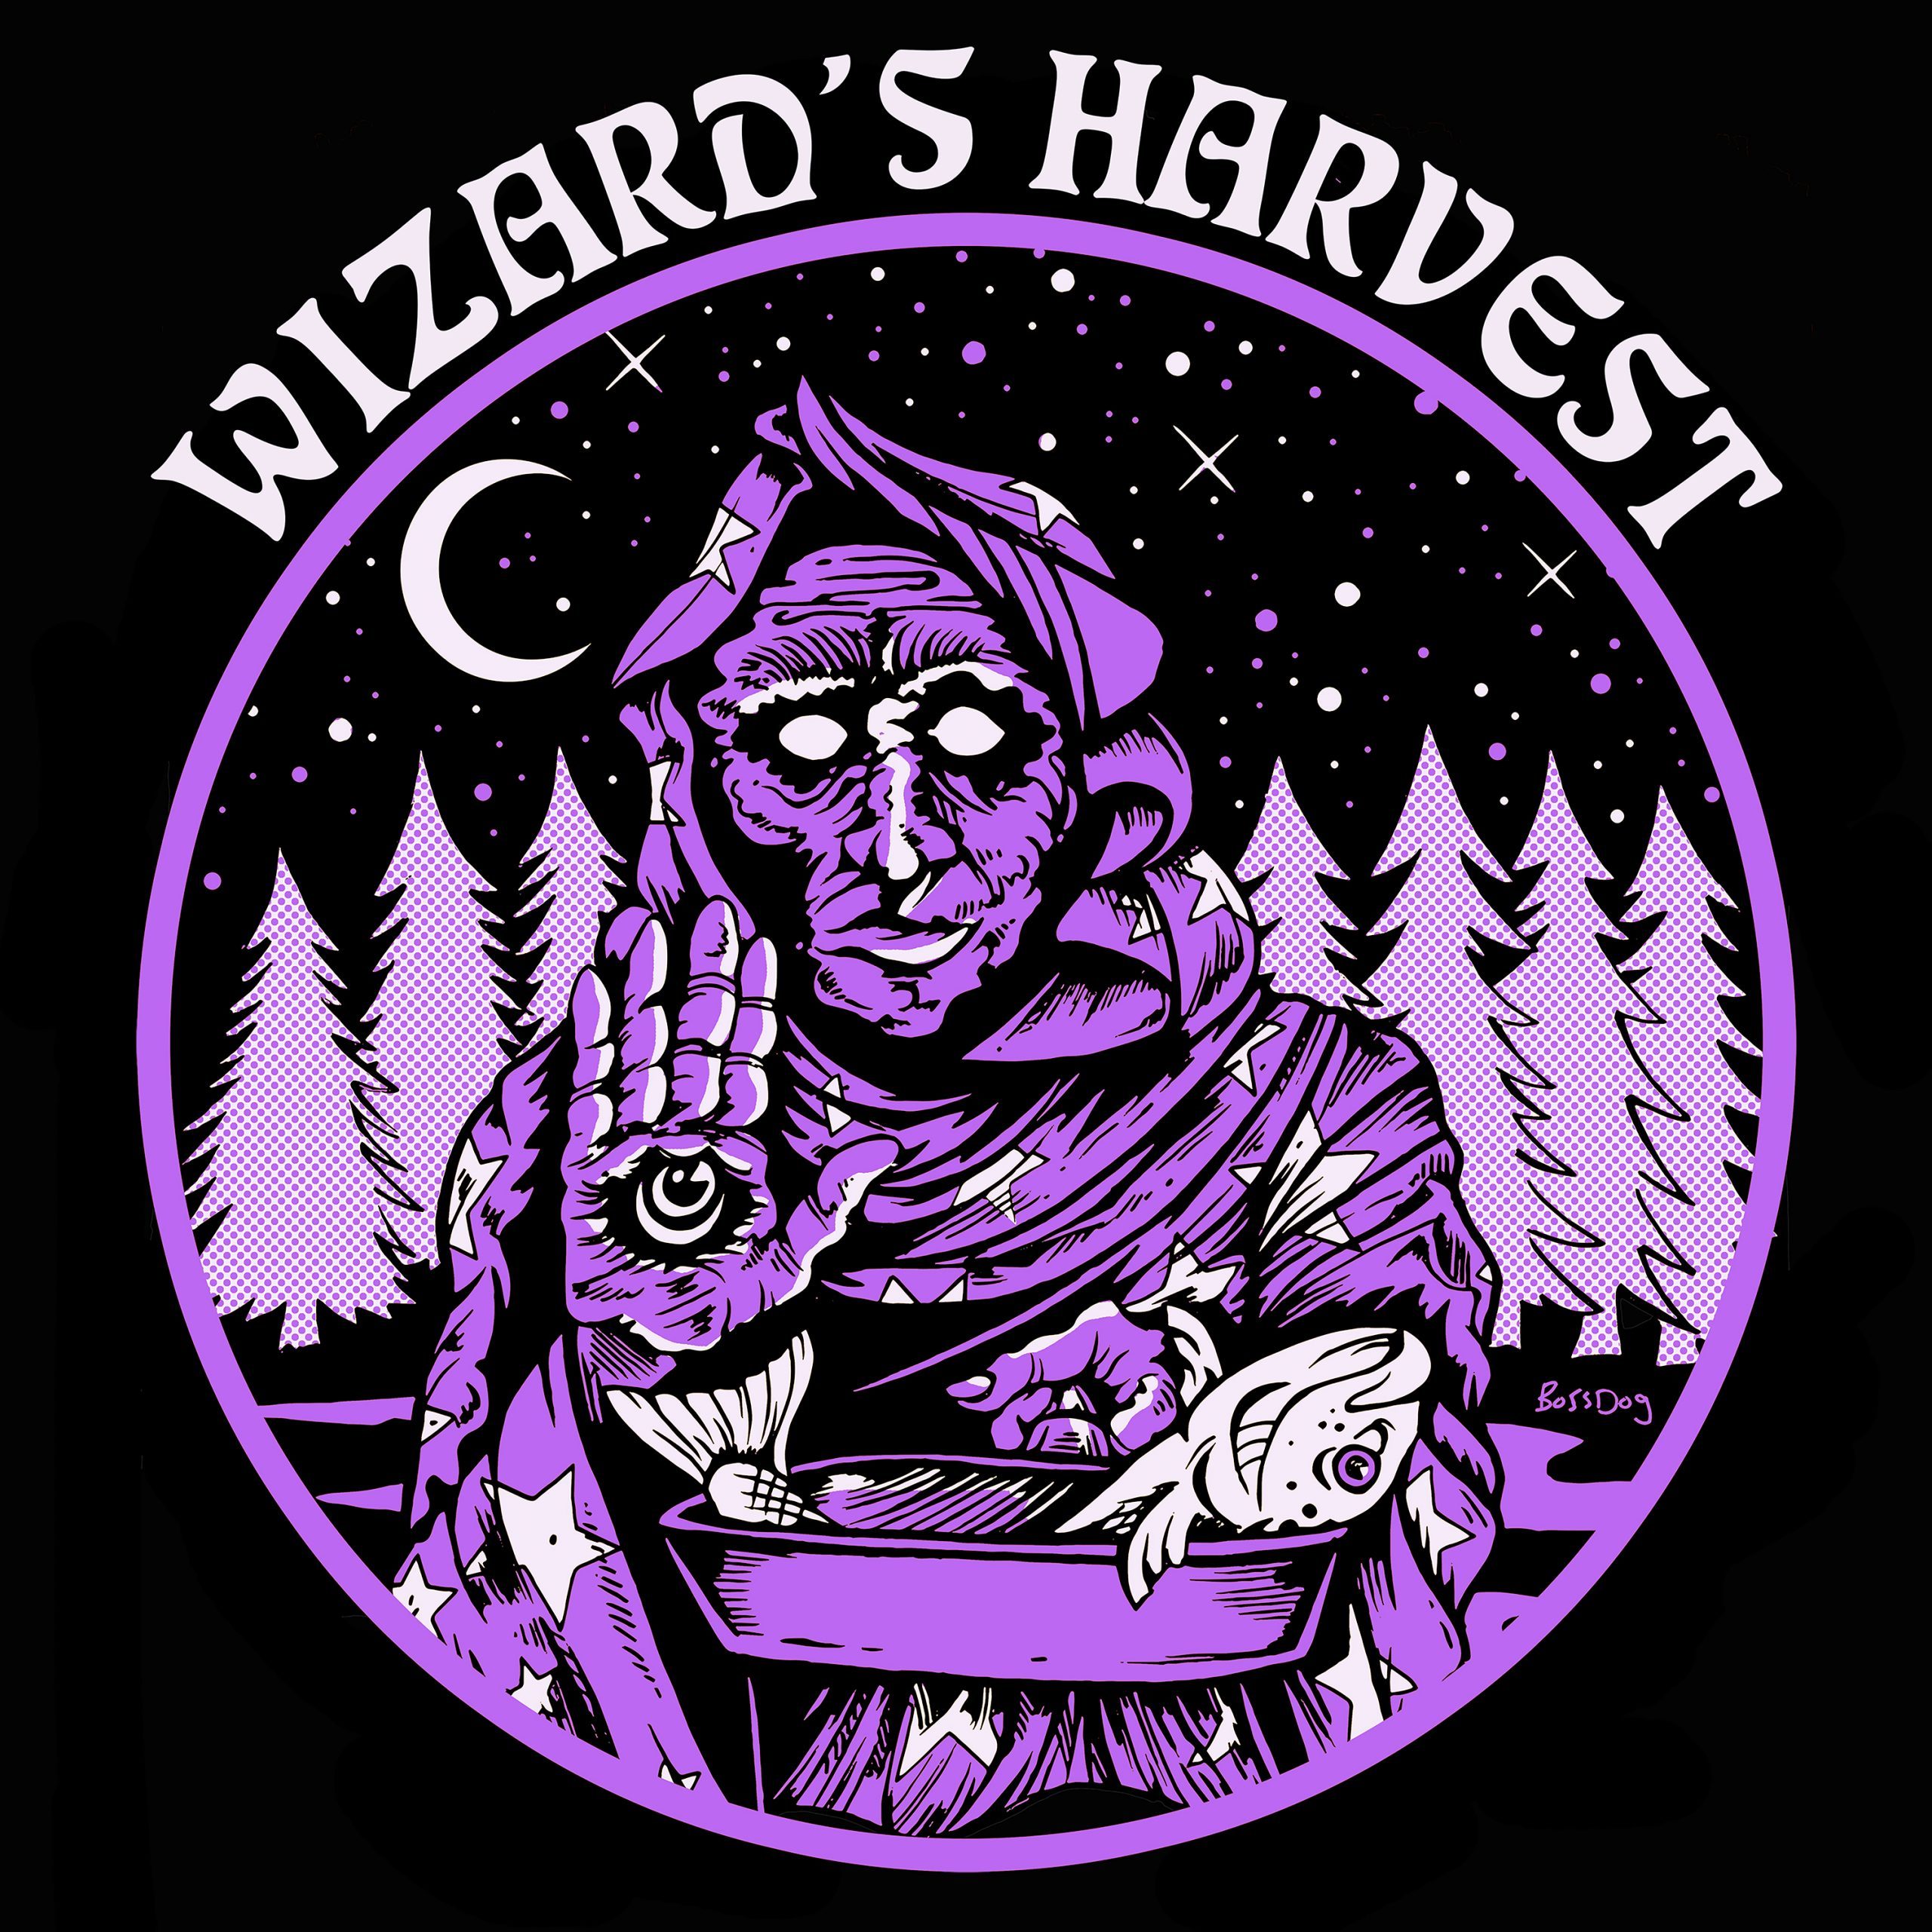 Wizards Harvest Catering Logo